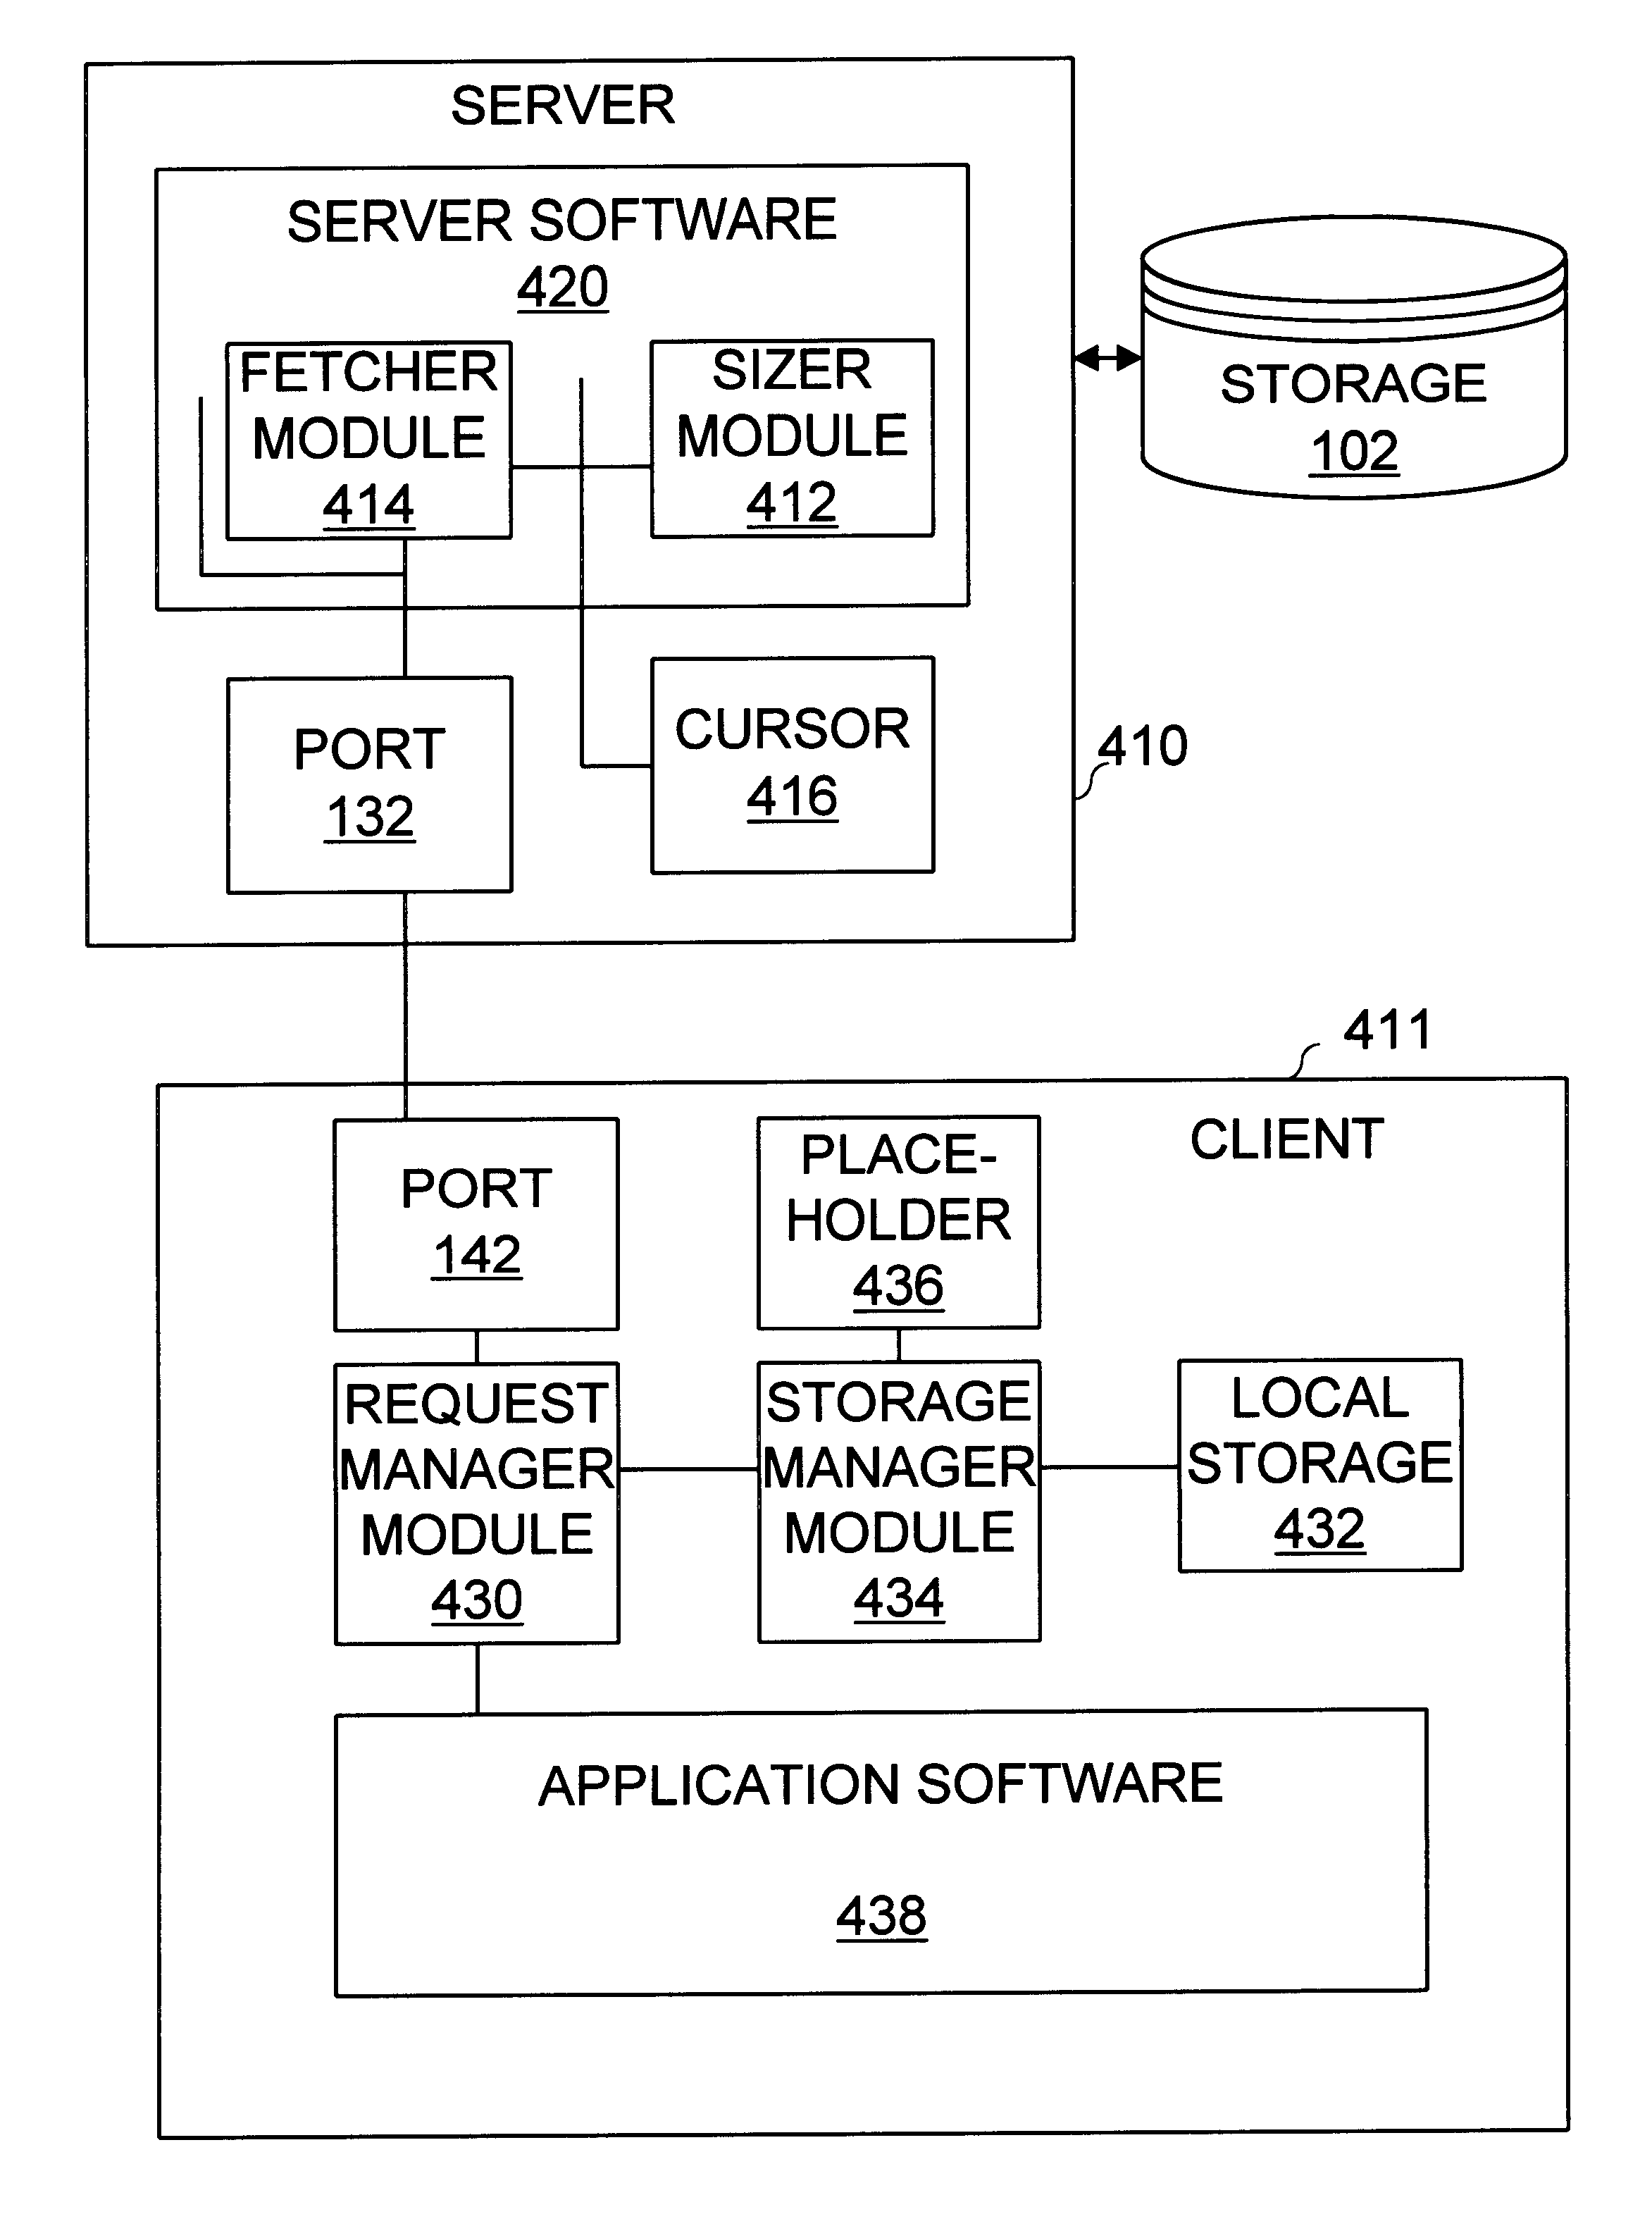 System and method for generating and transmitting a command in response to a request for additional data and data described in the request